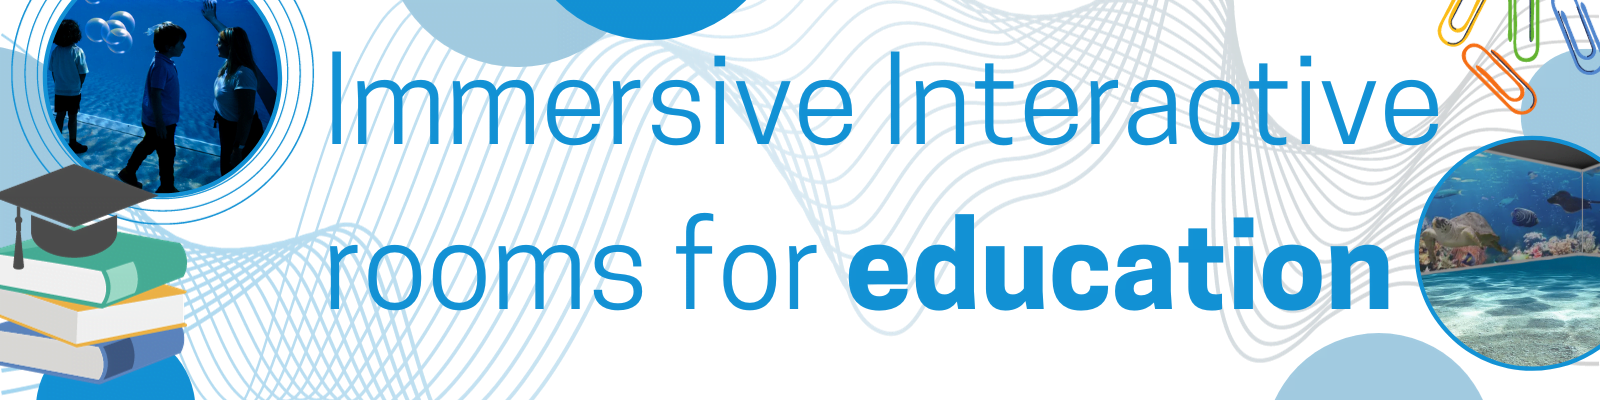 Immersive interactive for classrooms banner 